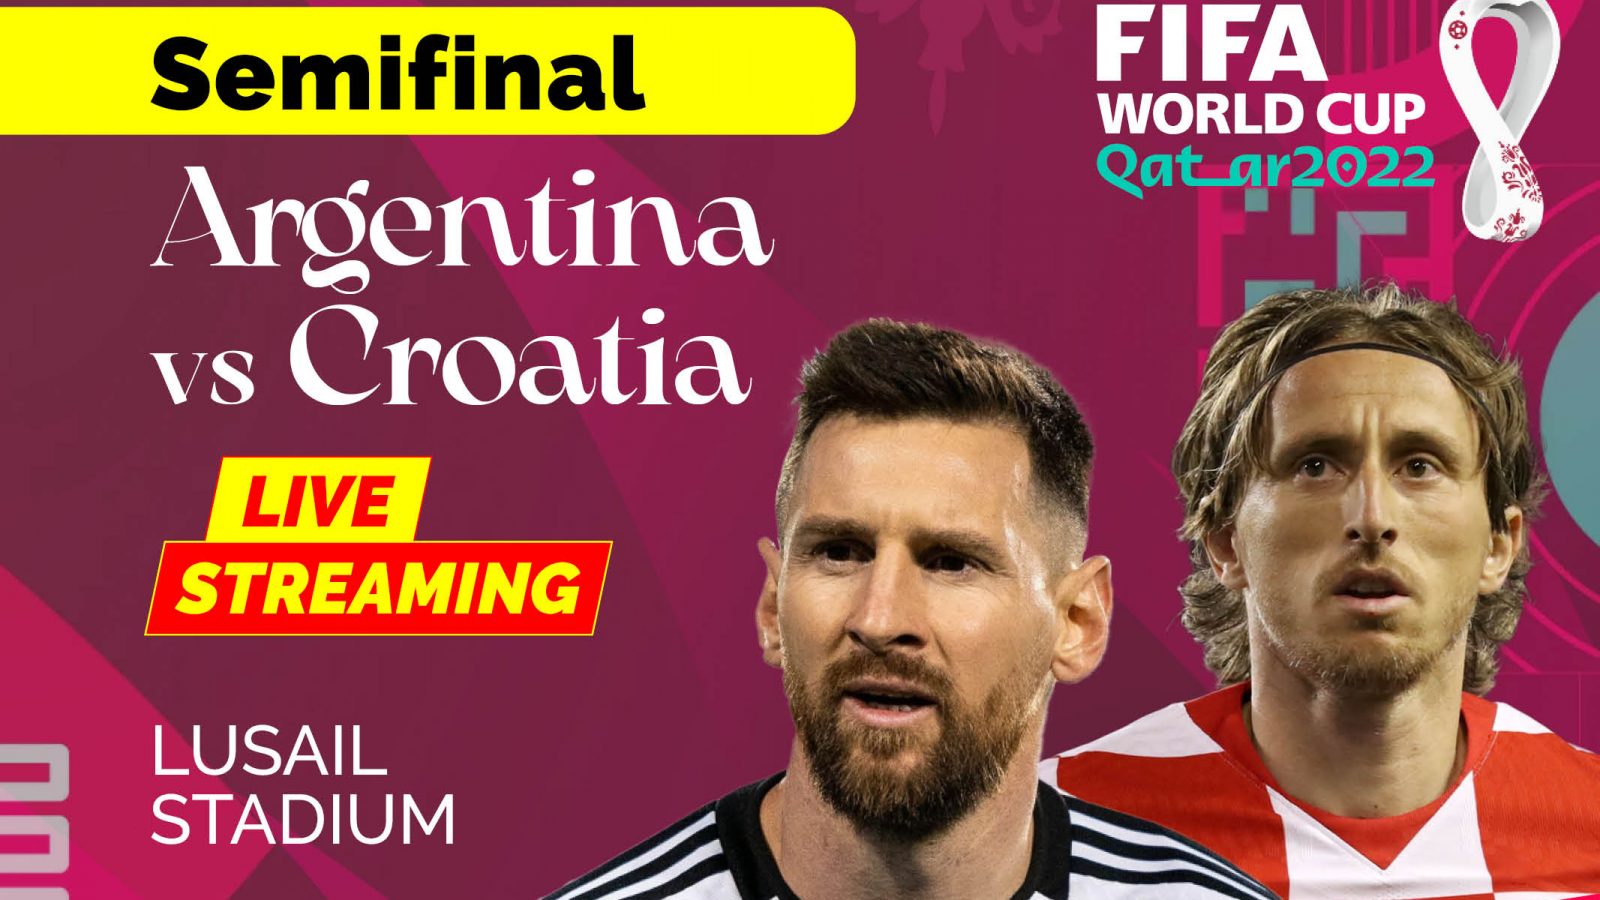 Argentina vs Croatia, FIFA World Cup 2022 Semifinal Live Streaming How to Watch ARG vs CRO Coverage on TV And Online in India